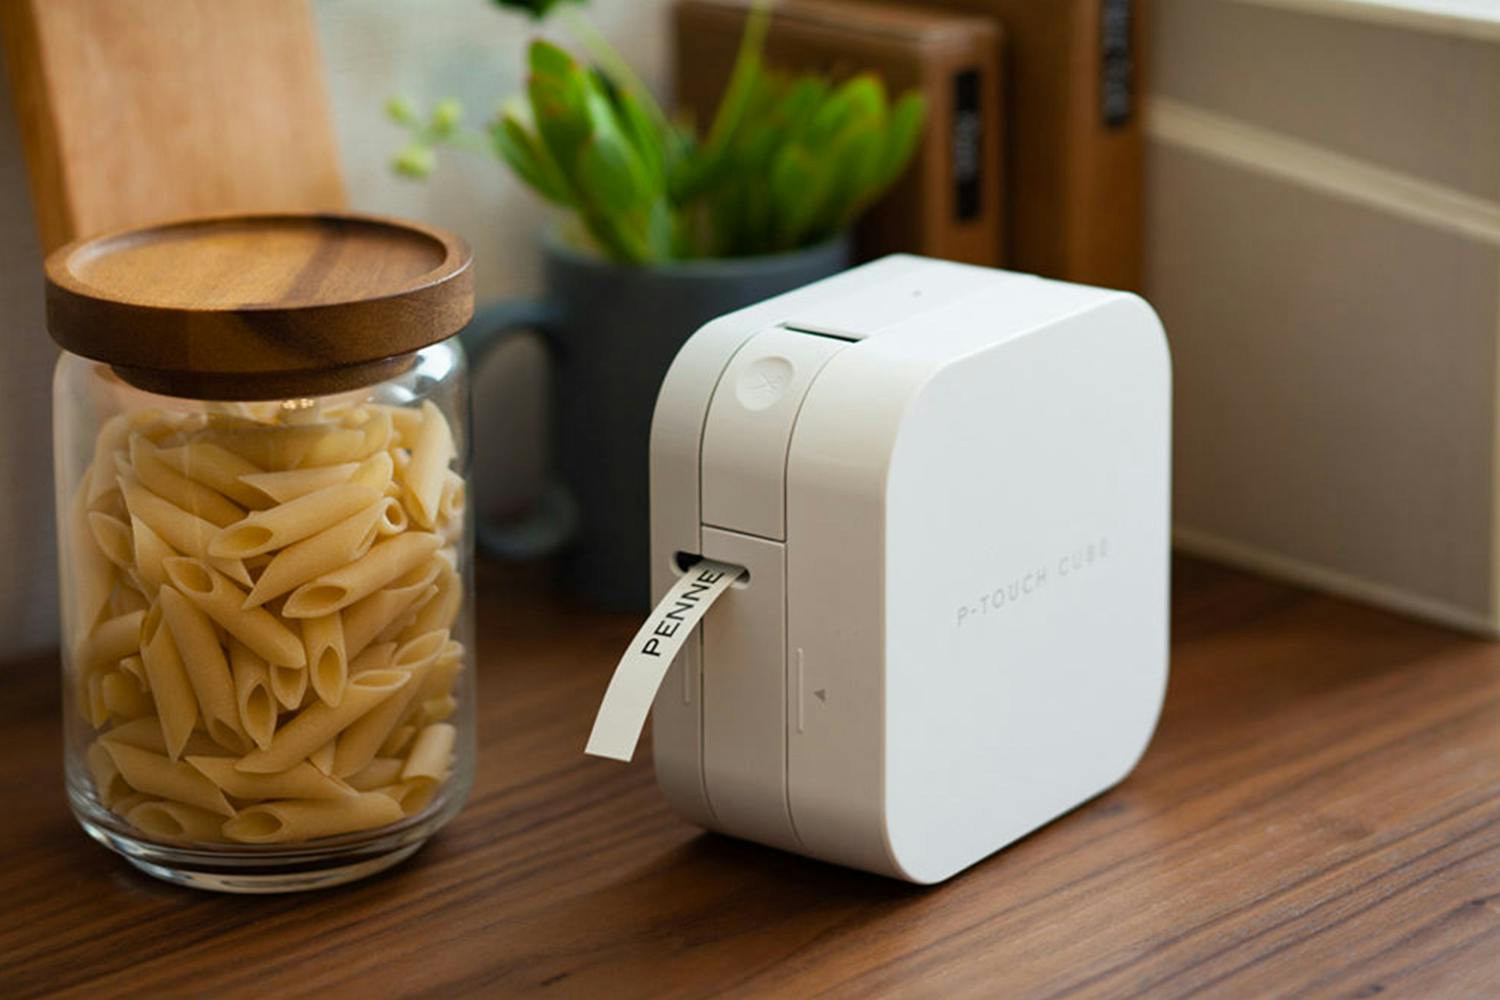 Brother P-Touch CUBE Bluetooth Label Printer